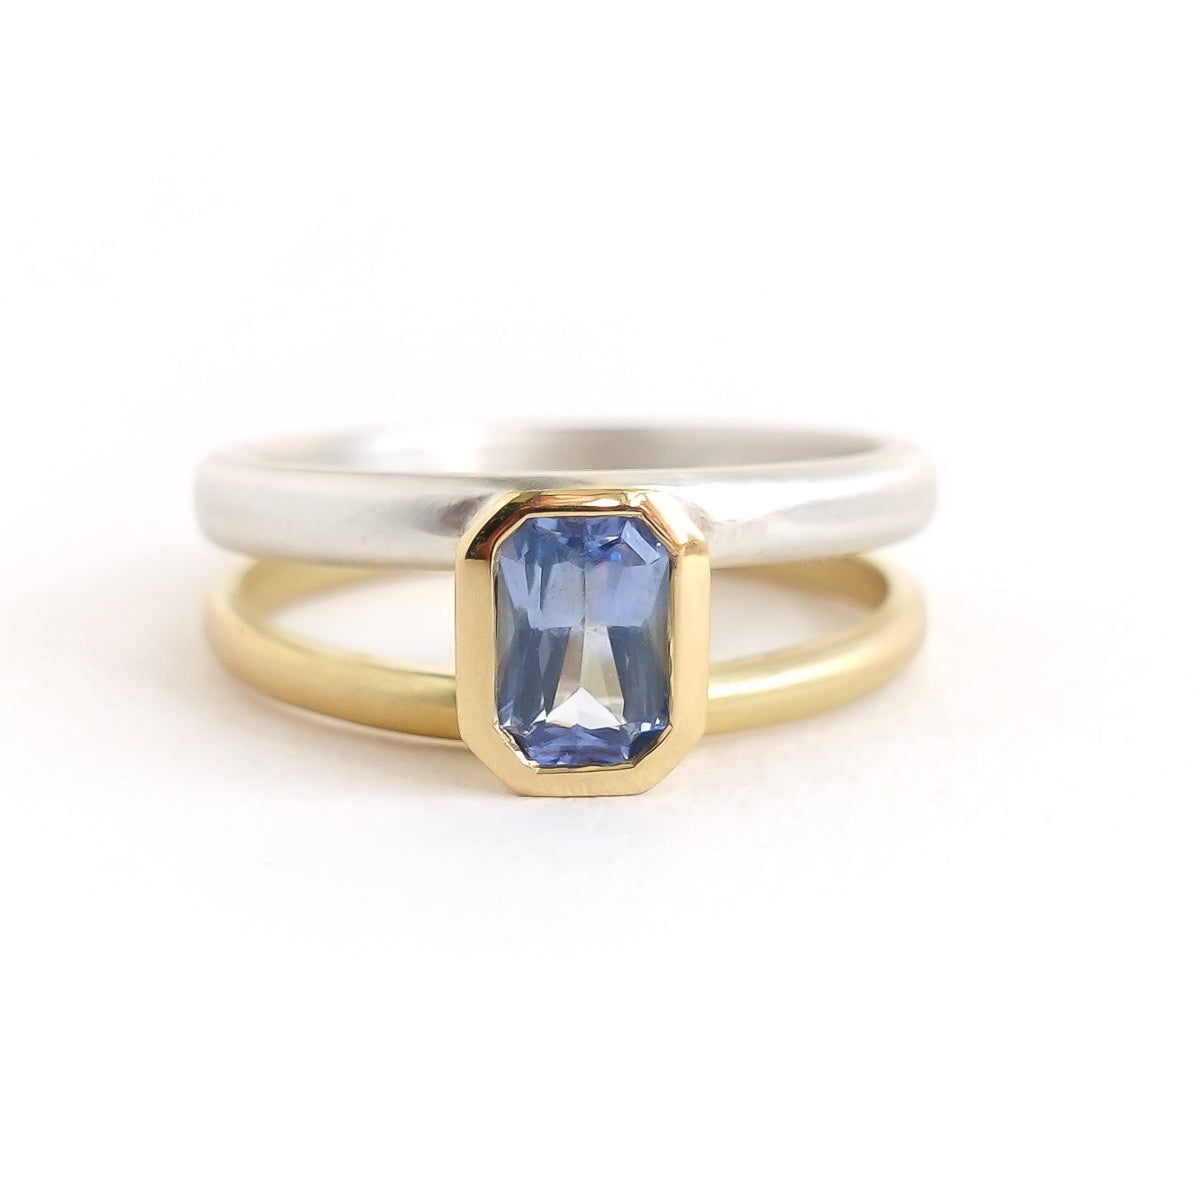 Silver 18ct gold and blue sapphire two band ring - bespoke and unique.